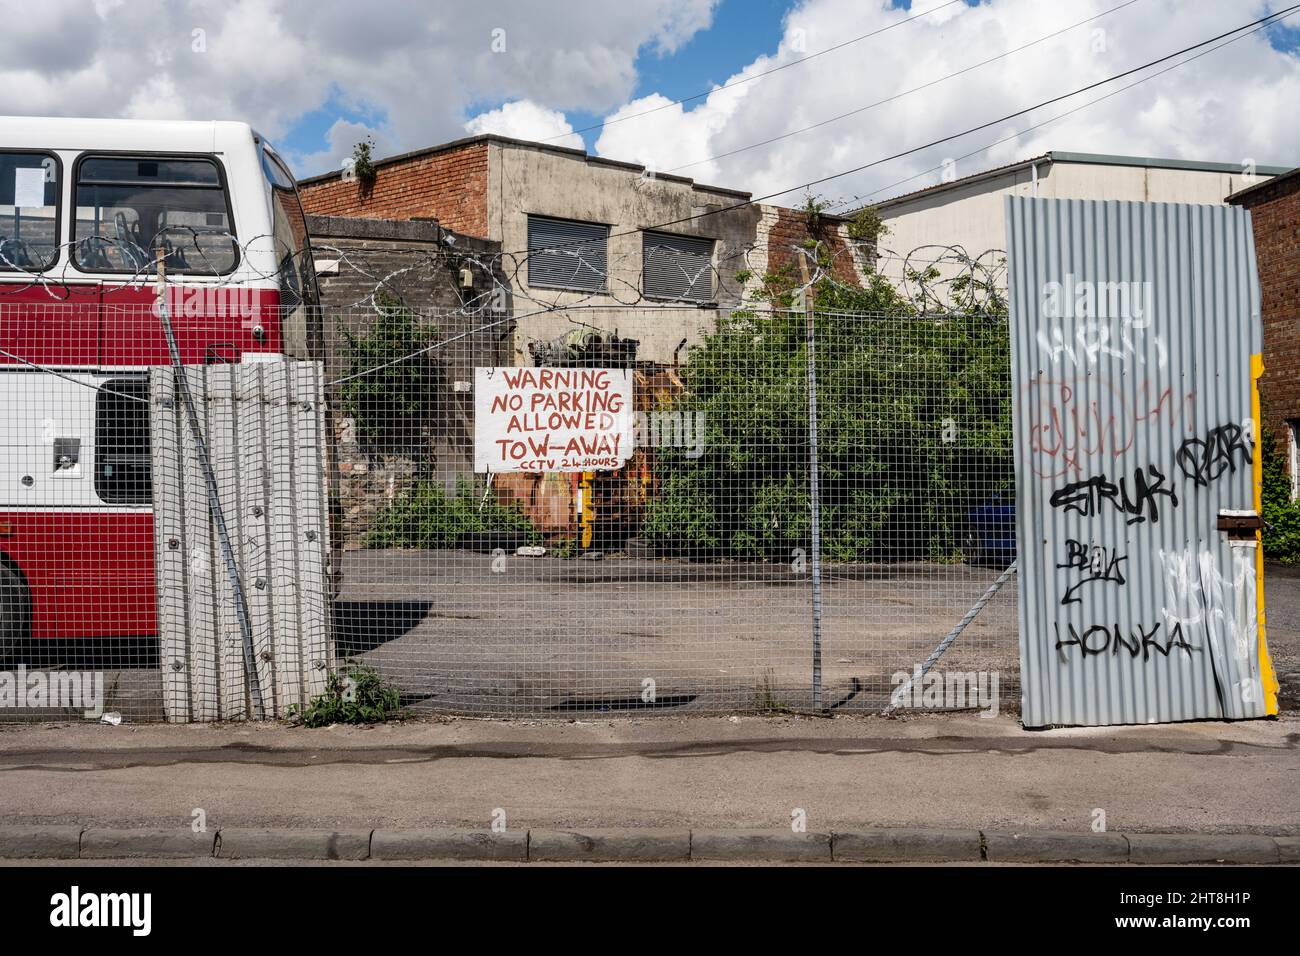 An old double-decker bus is parked beside light industrial workshops on Gas Lane, an inner city regeneration area scheduled for urban renewal in Brist Stock Photo